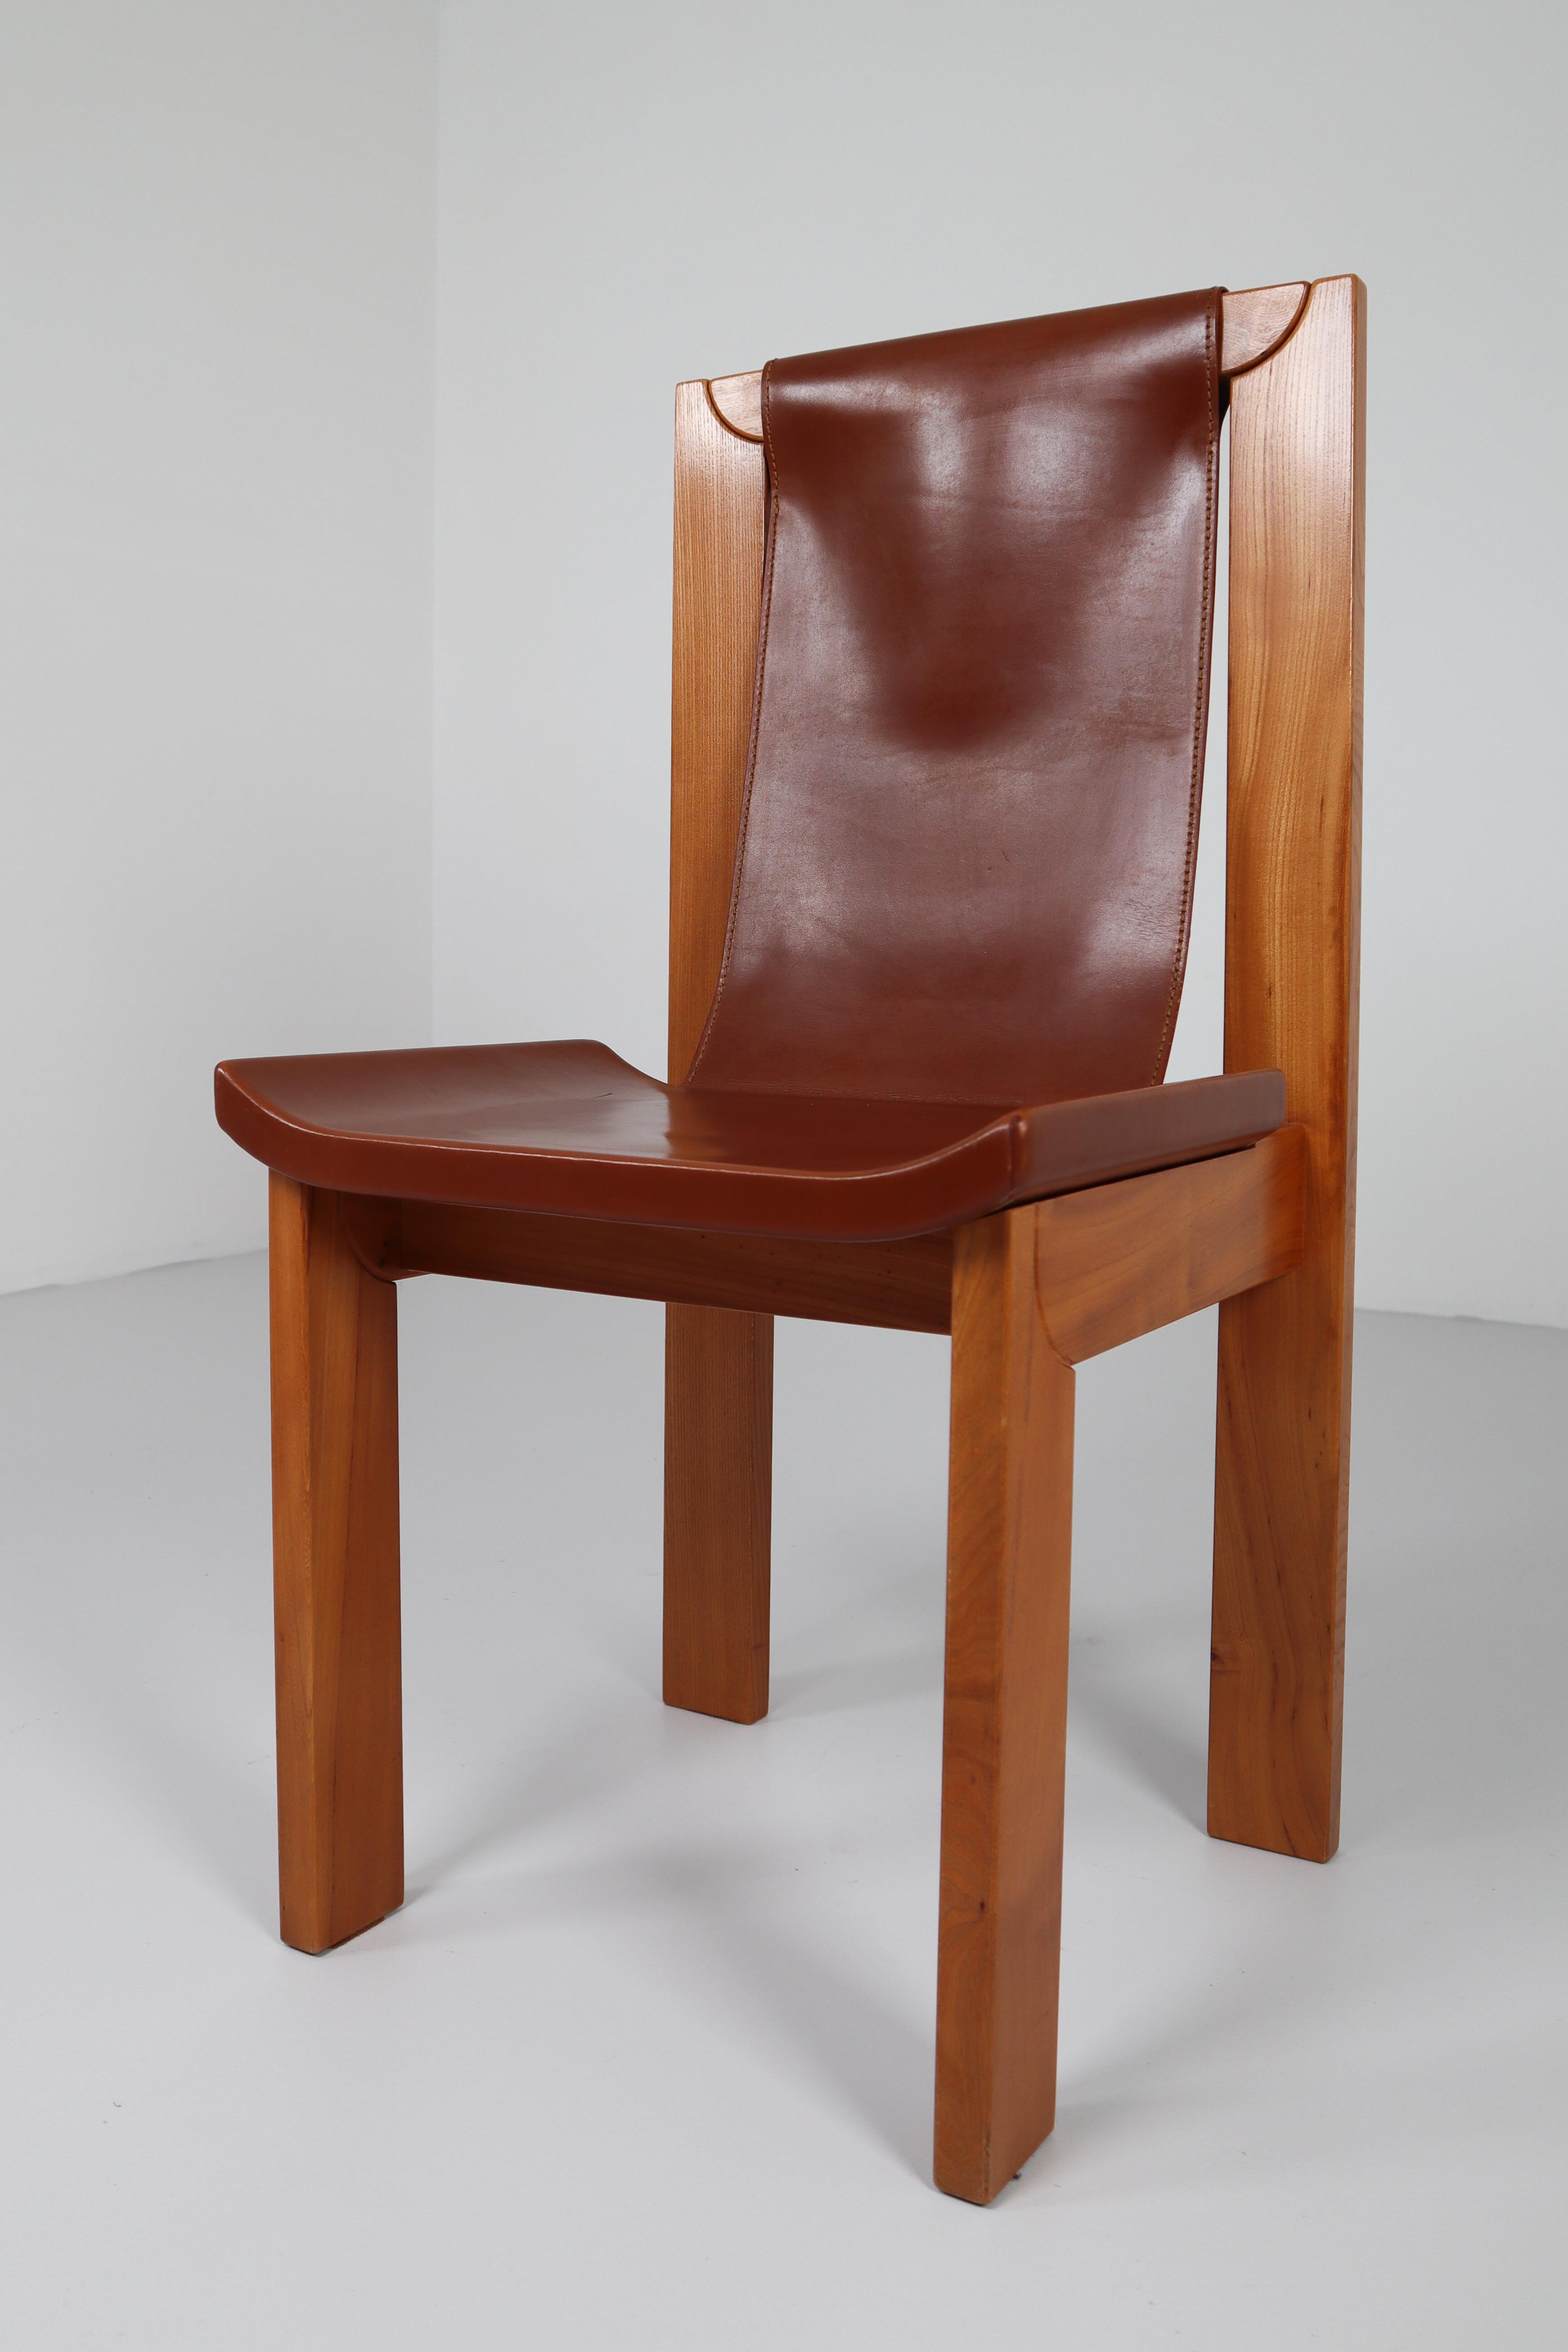 French Set of Four Cognac Leather Dining Chairs in Elmwood, France, 1960s